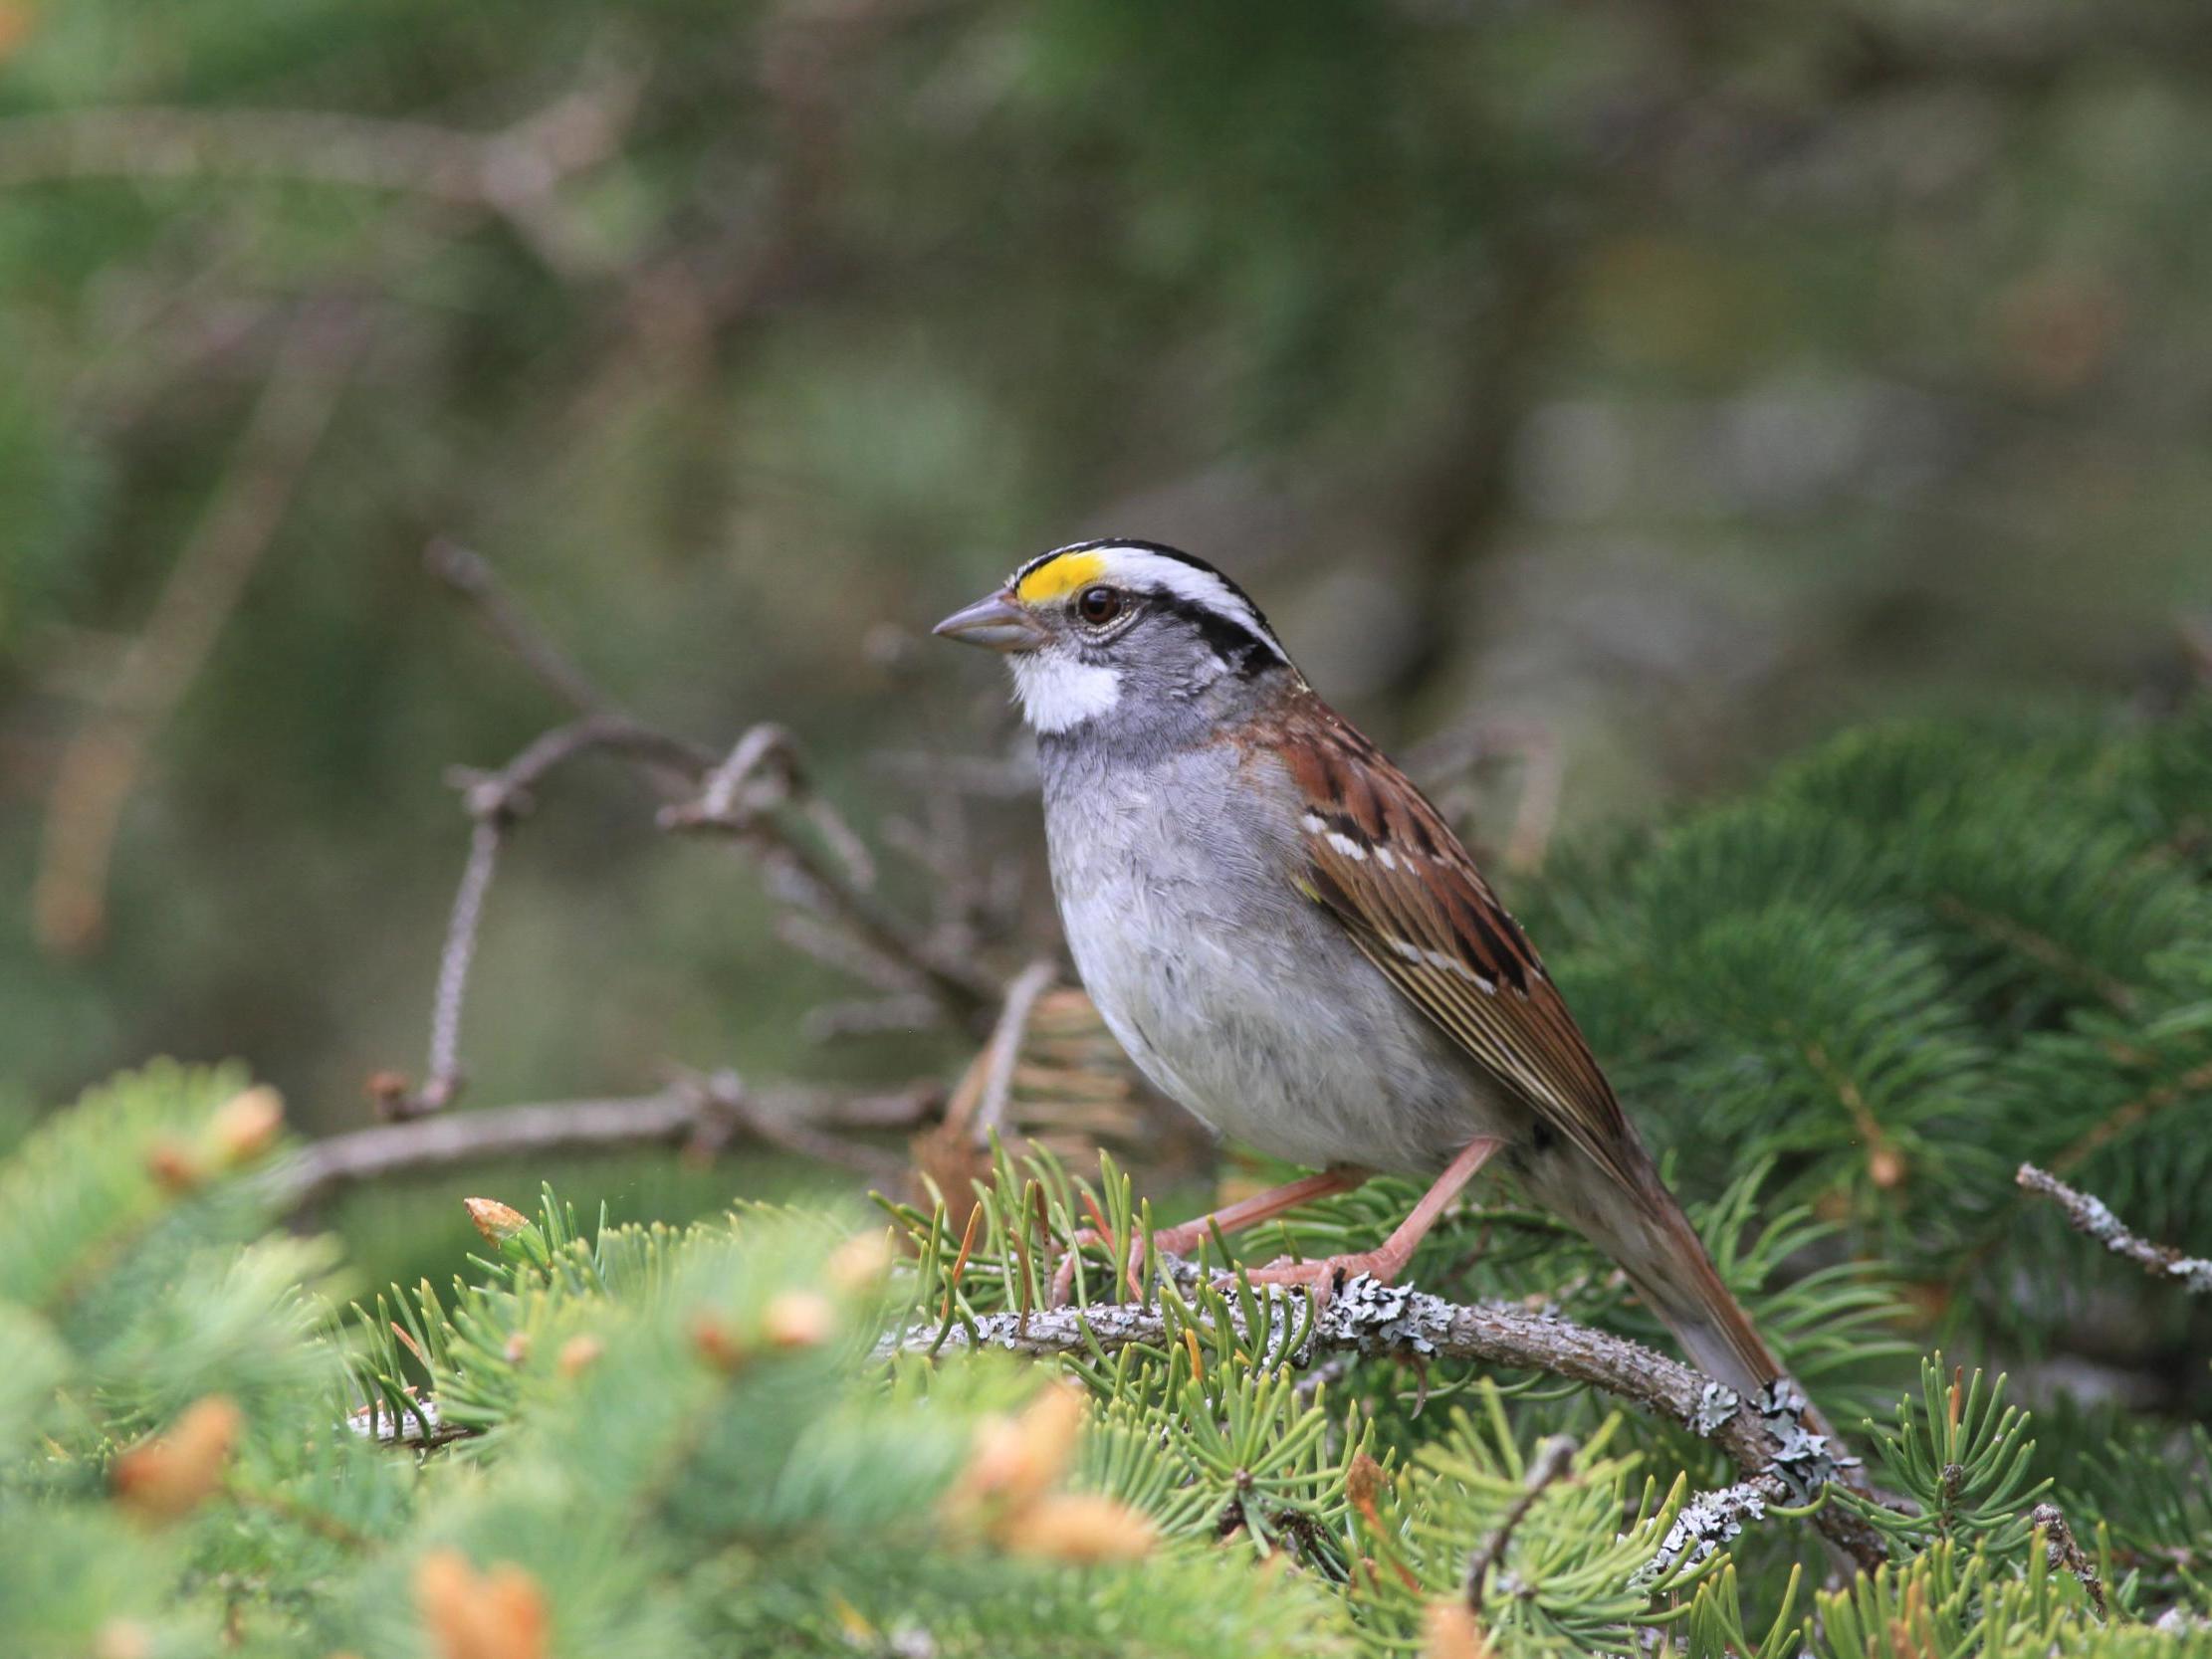 White-throated sparrows have changed their tune en masse